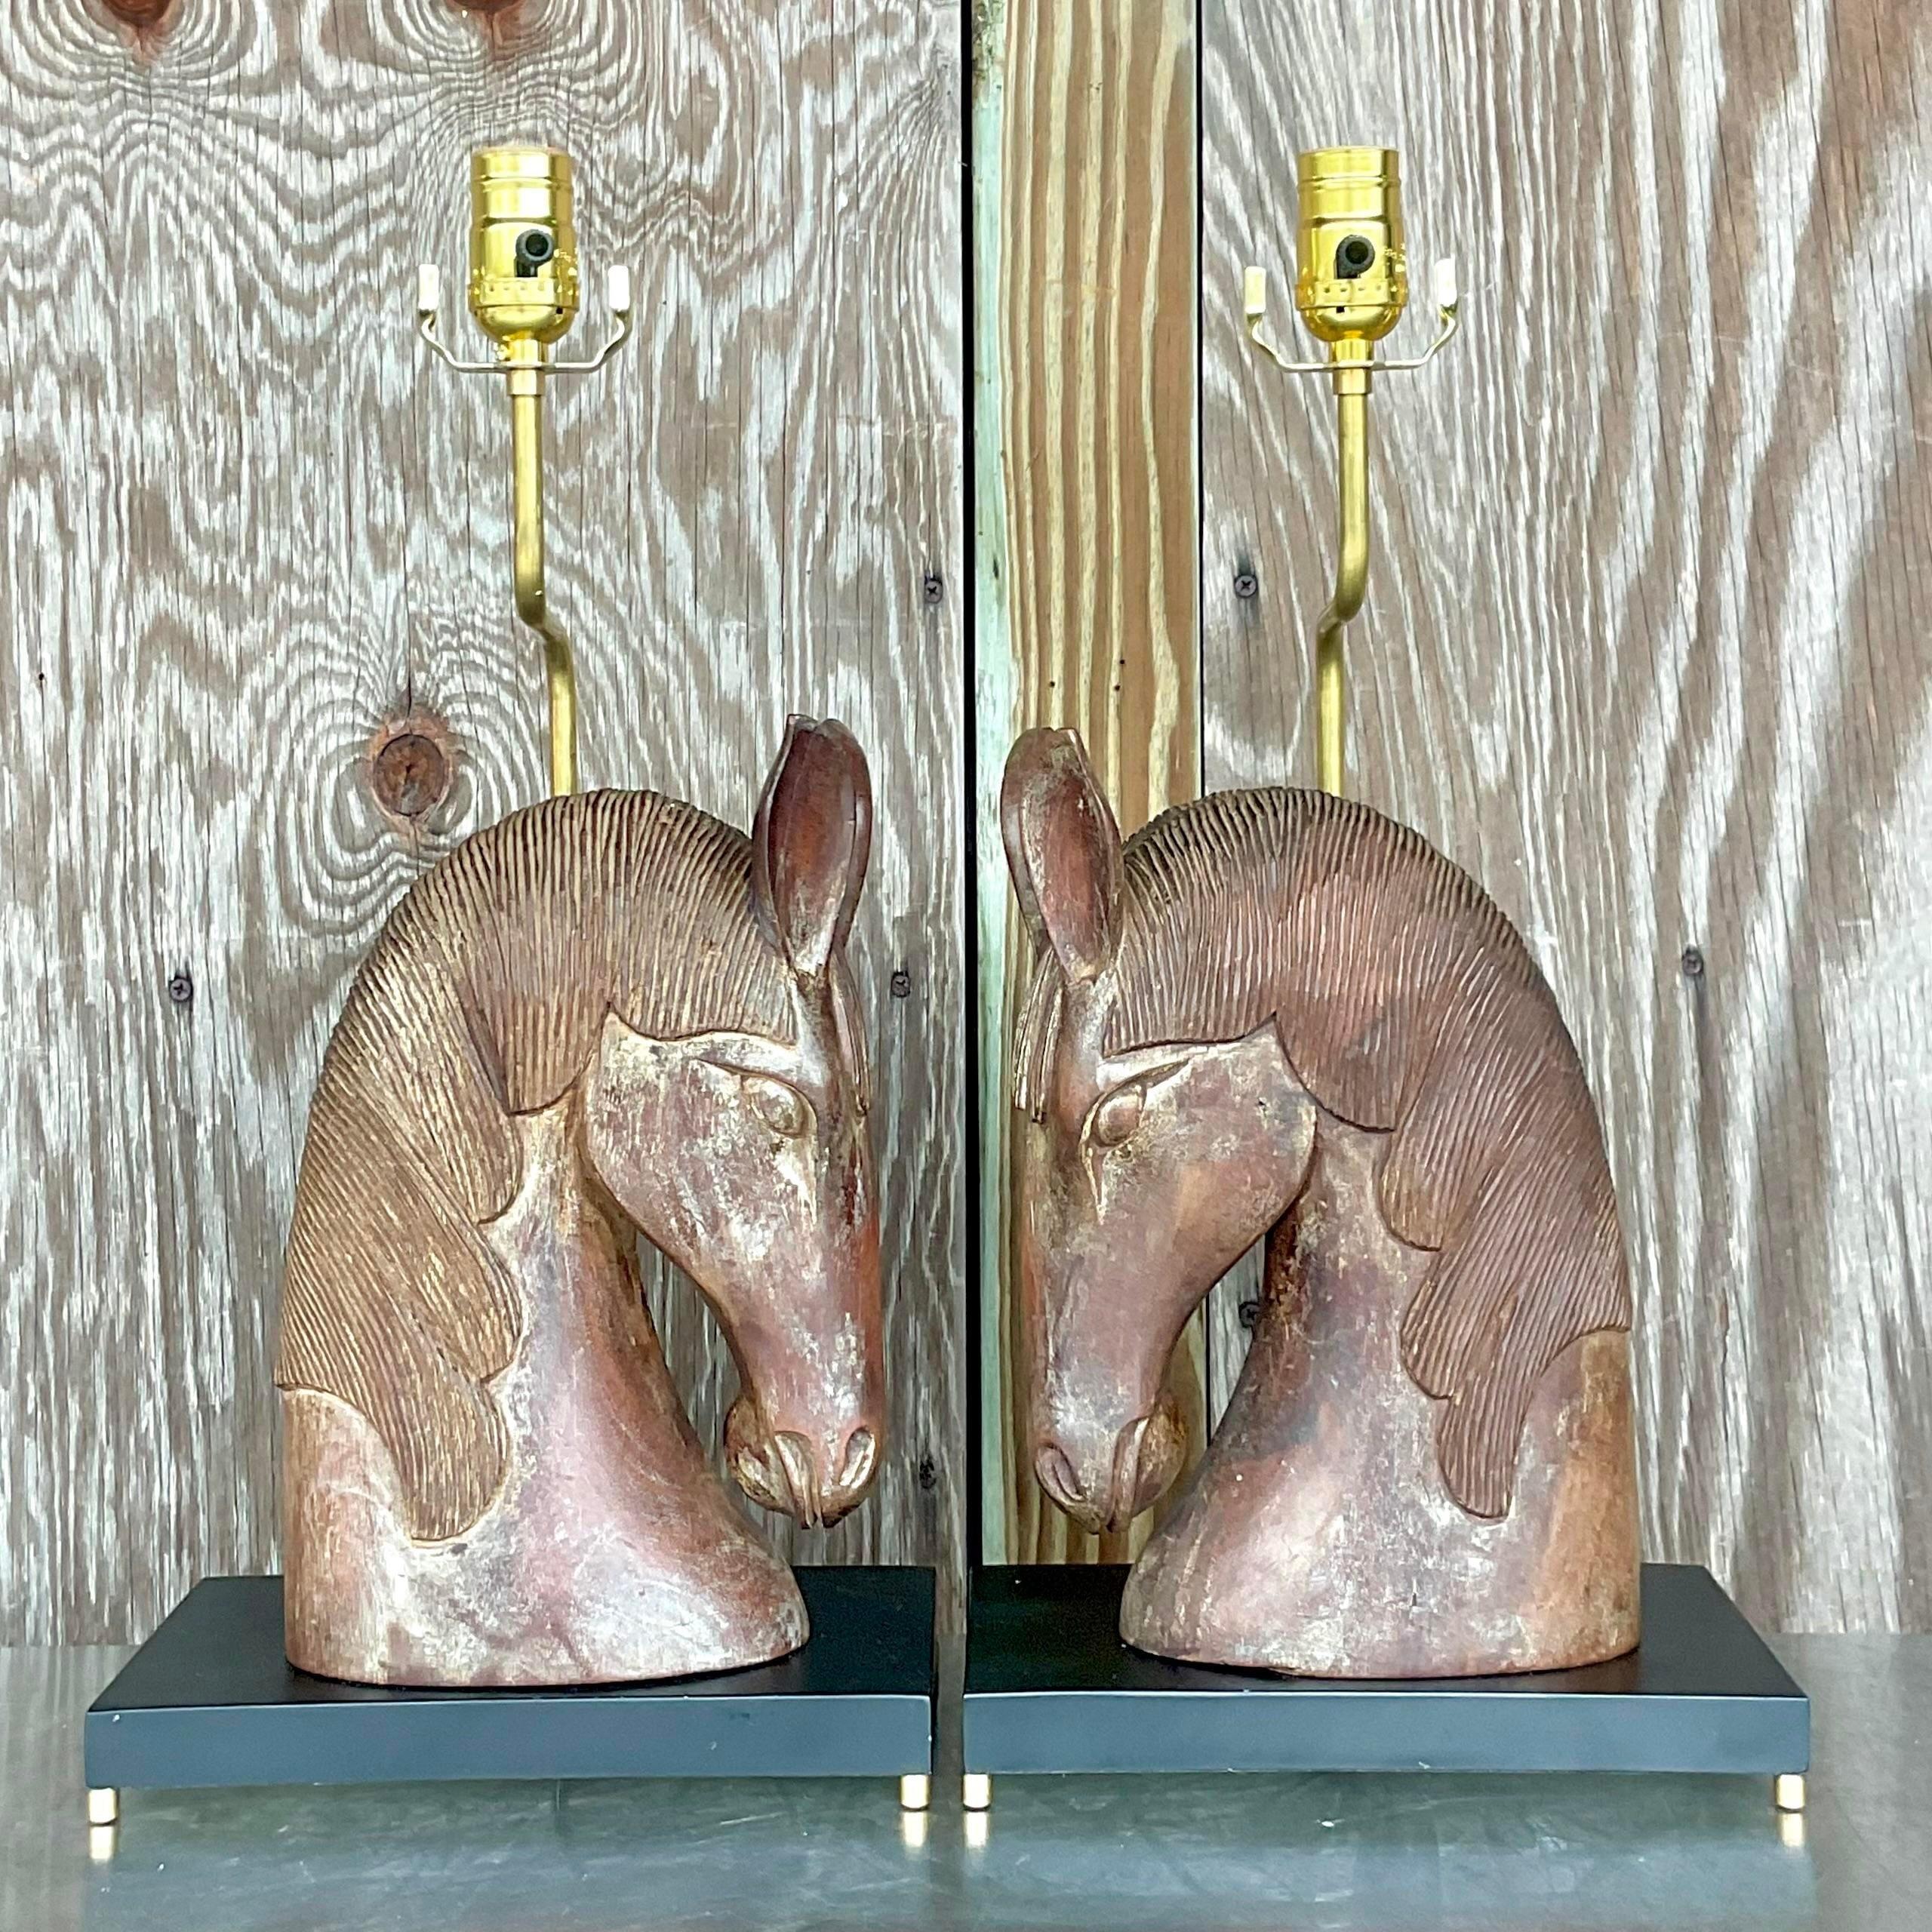 A striking pair of vintage Boho Table lamps. Chic hand carved wood horse head with amazing attention to detail. Fully restored with all new wiring, hardware and plinths. Acquired from a Palm Beach estate. 